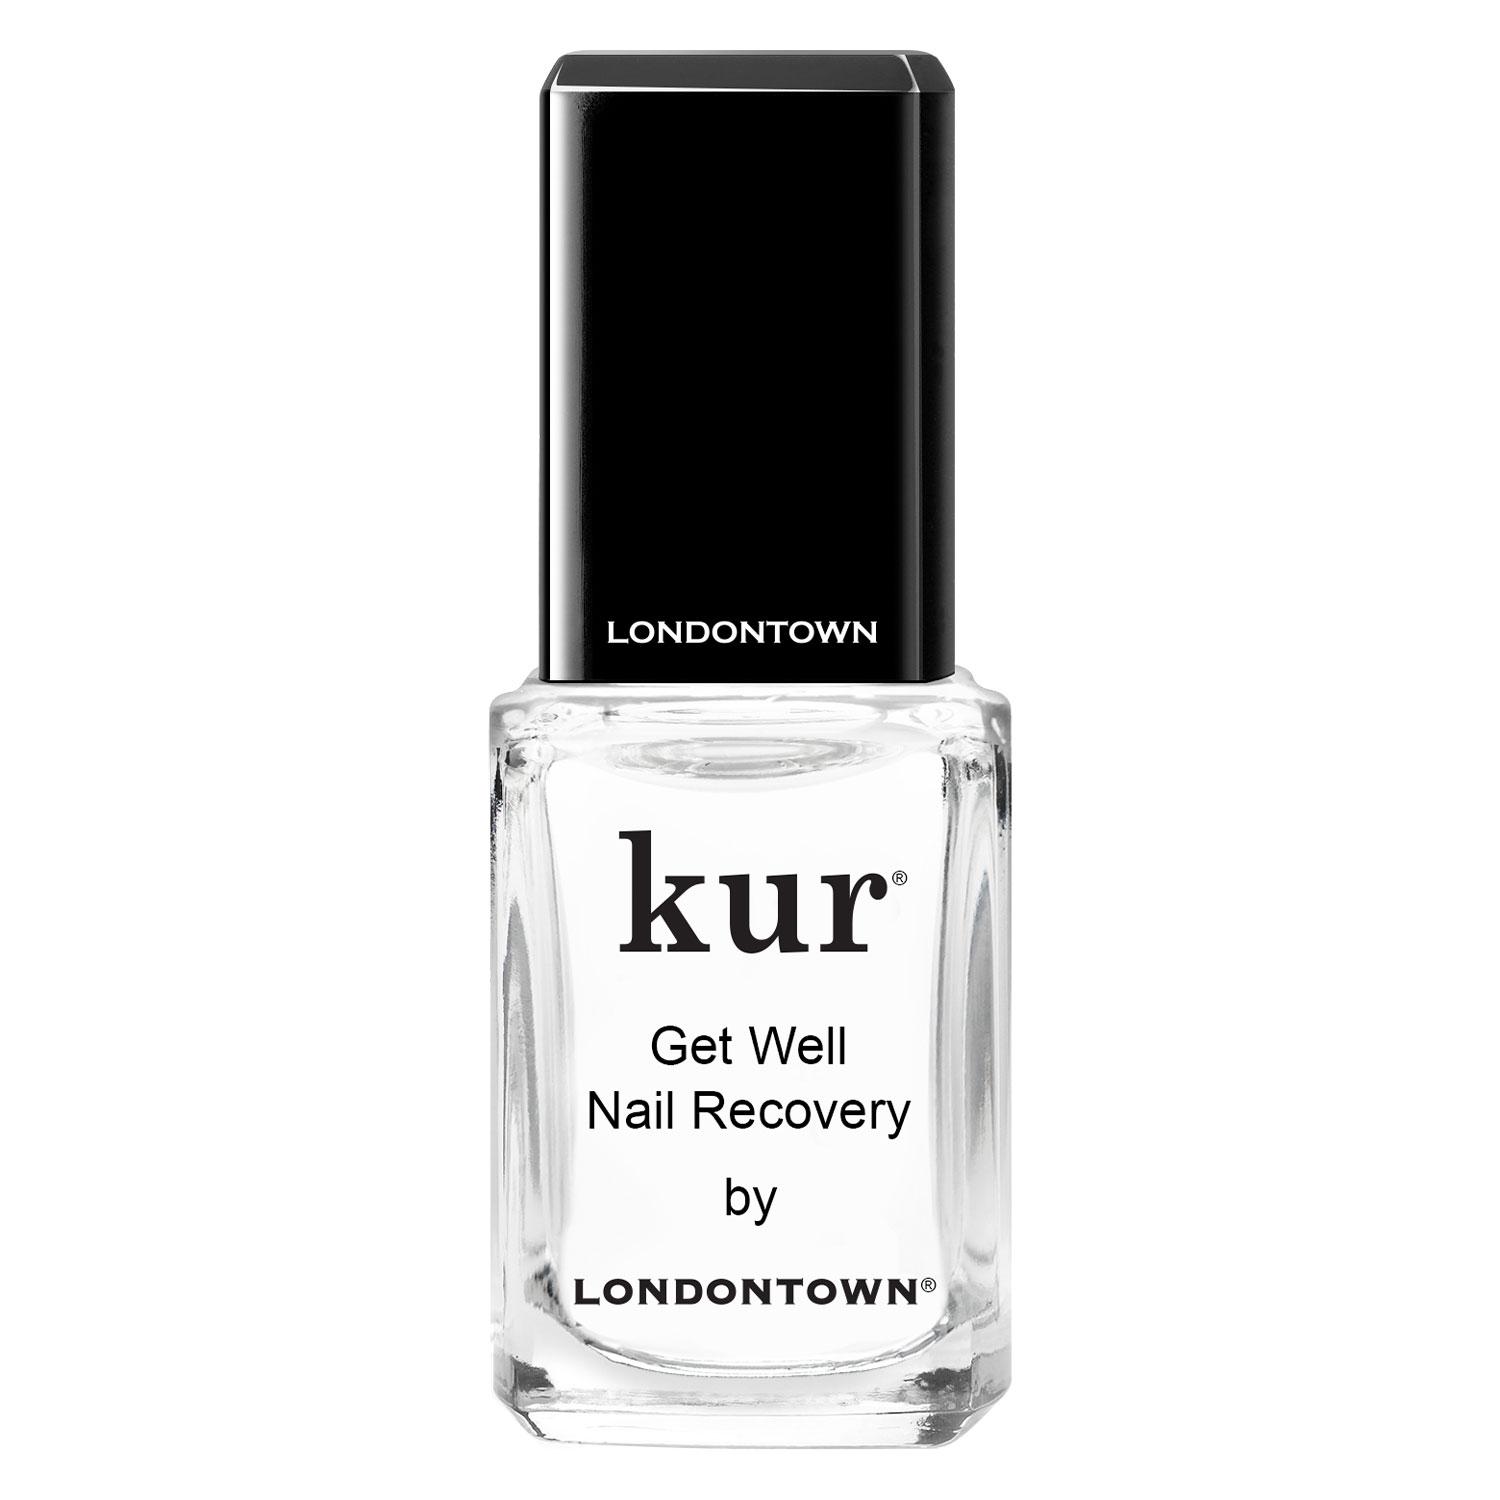 kur - Get Well Nail Recovery